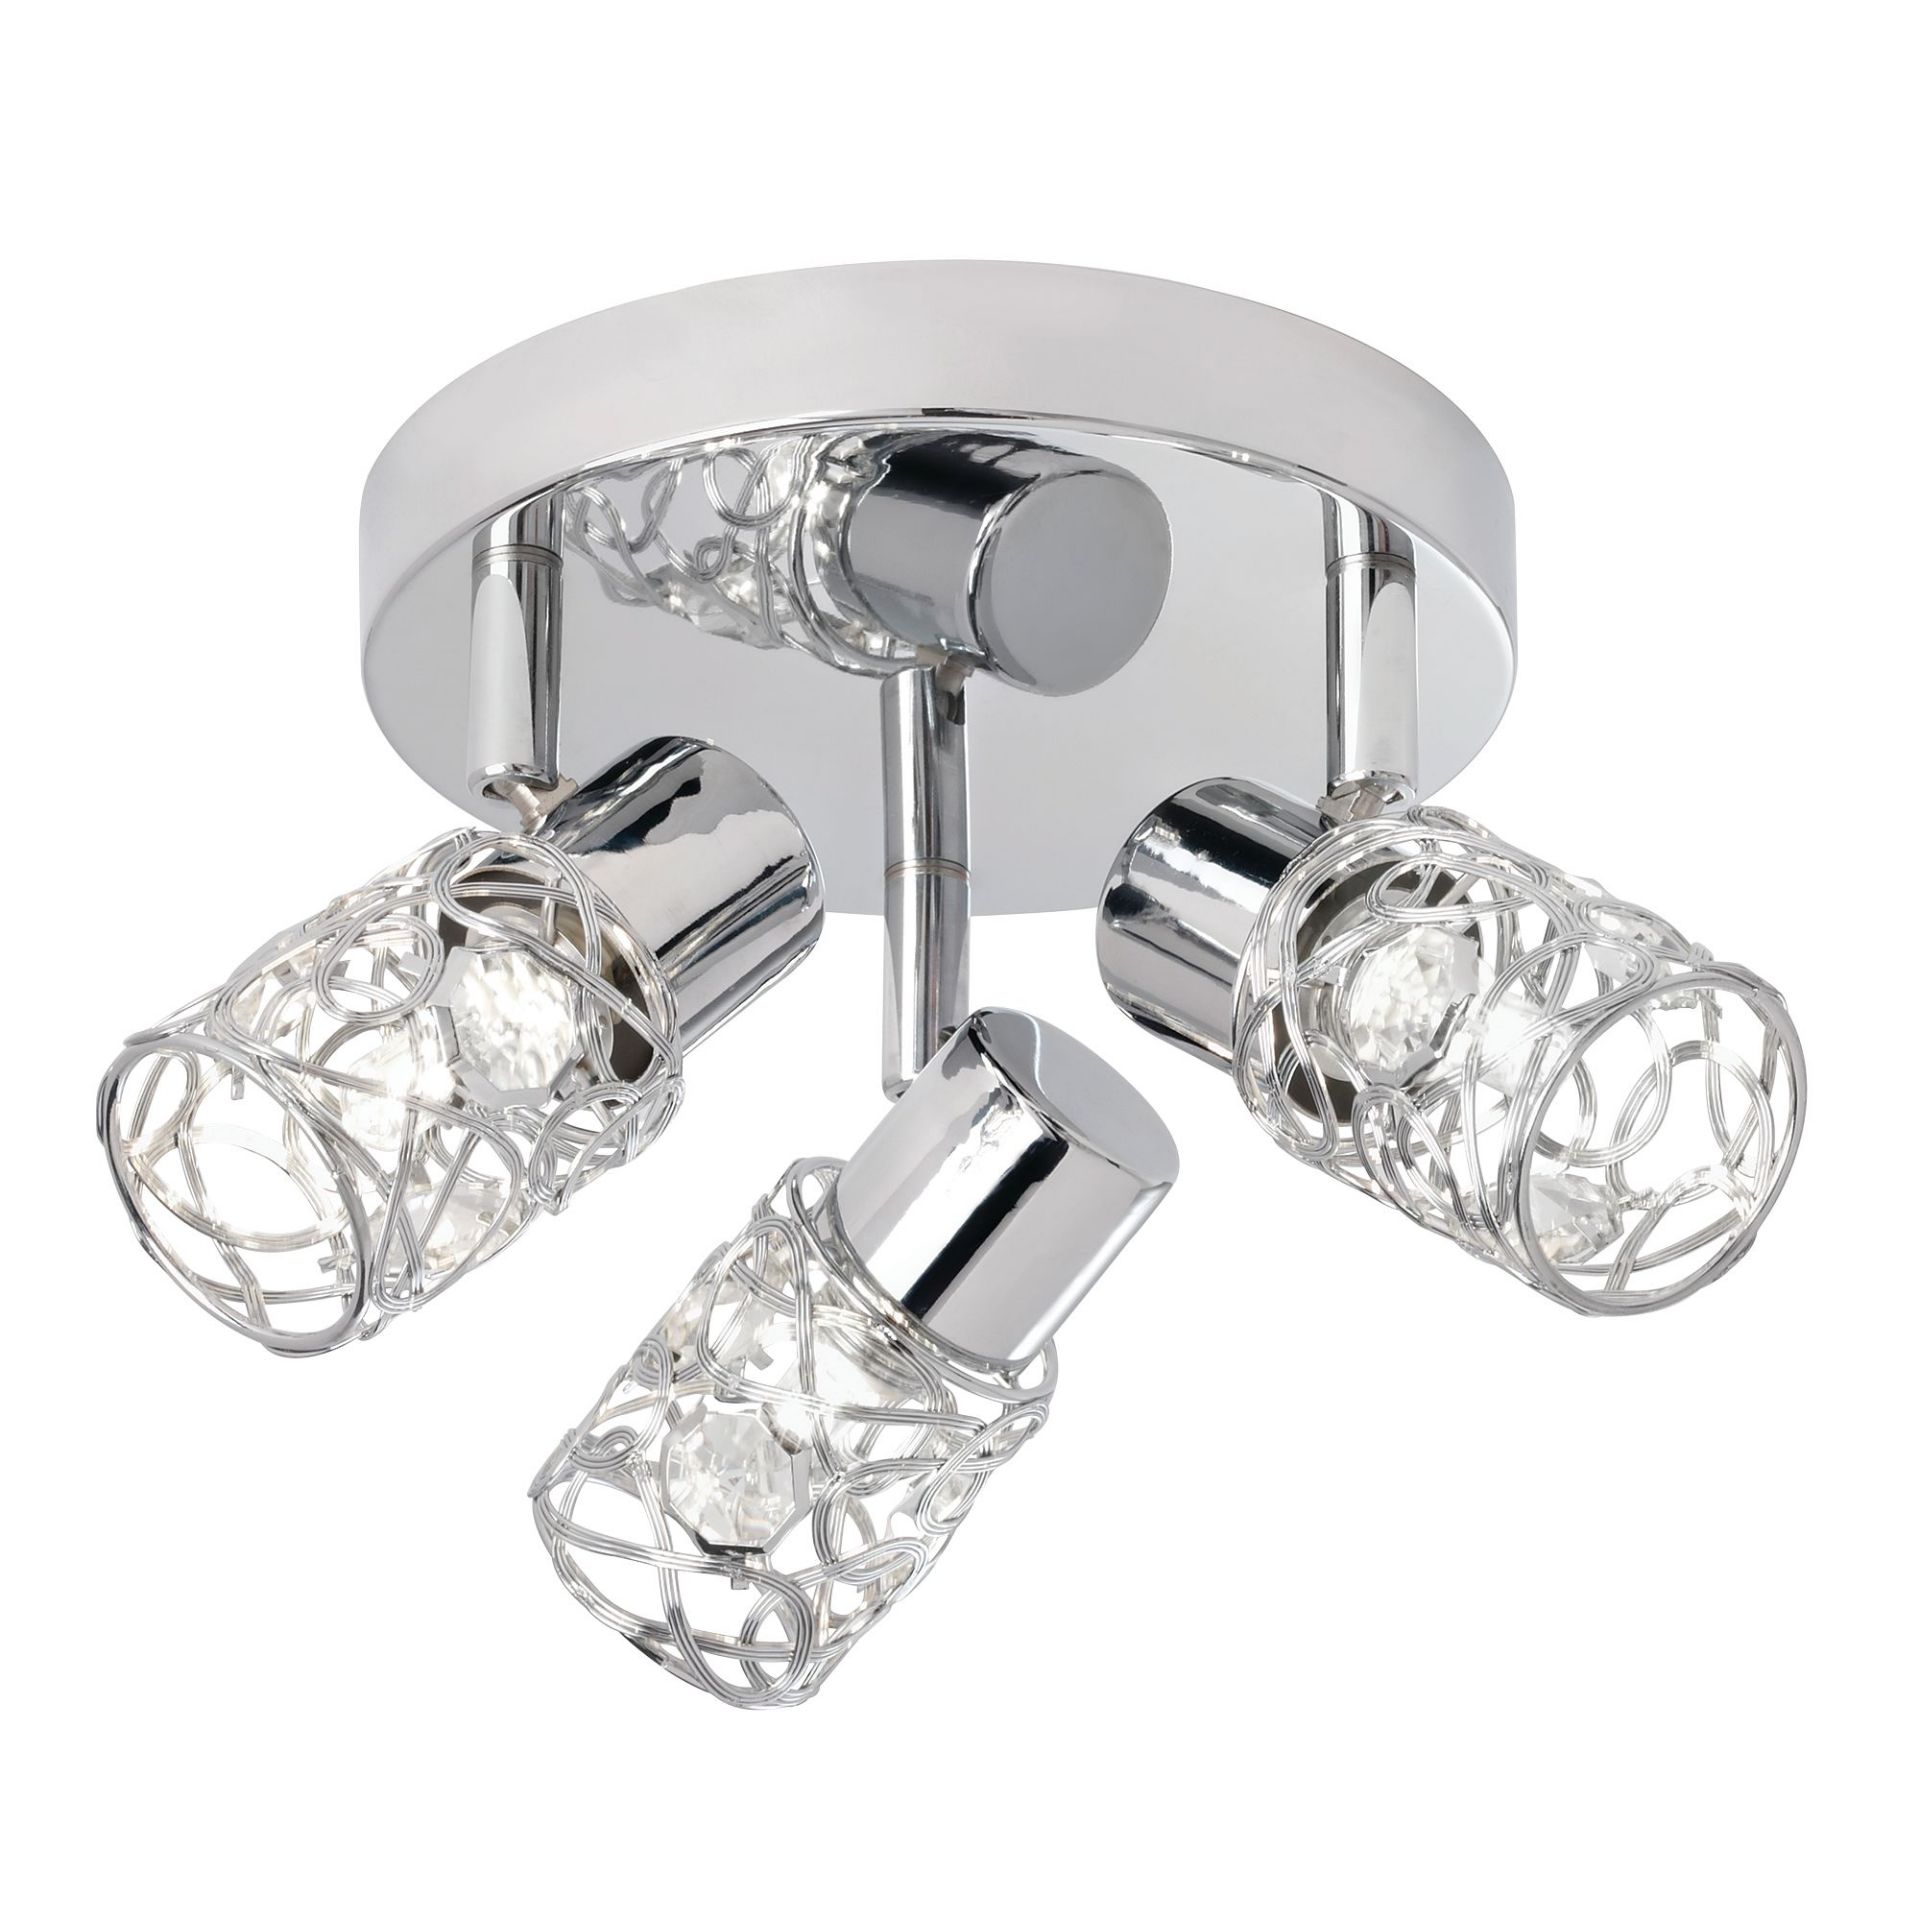 3 LIGHT CEILING SPOTLIGHT IN CHROME AND CLEAR GLASS. 32CM WIDE. 33W.